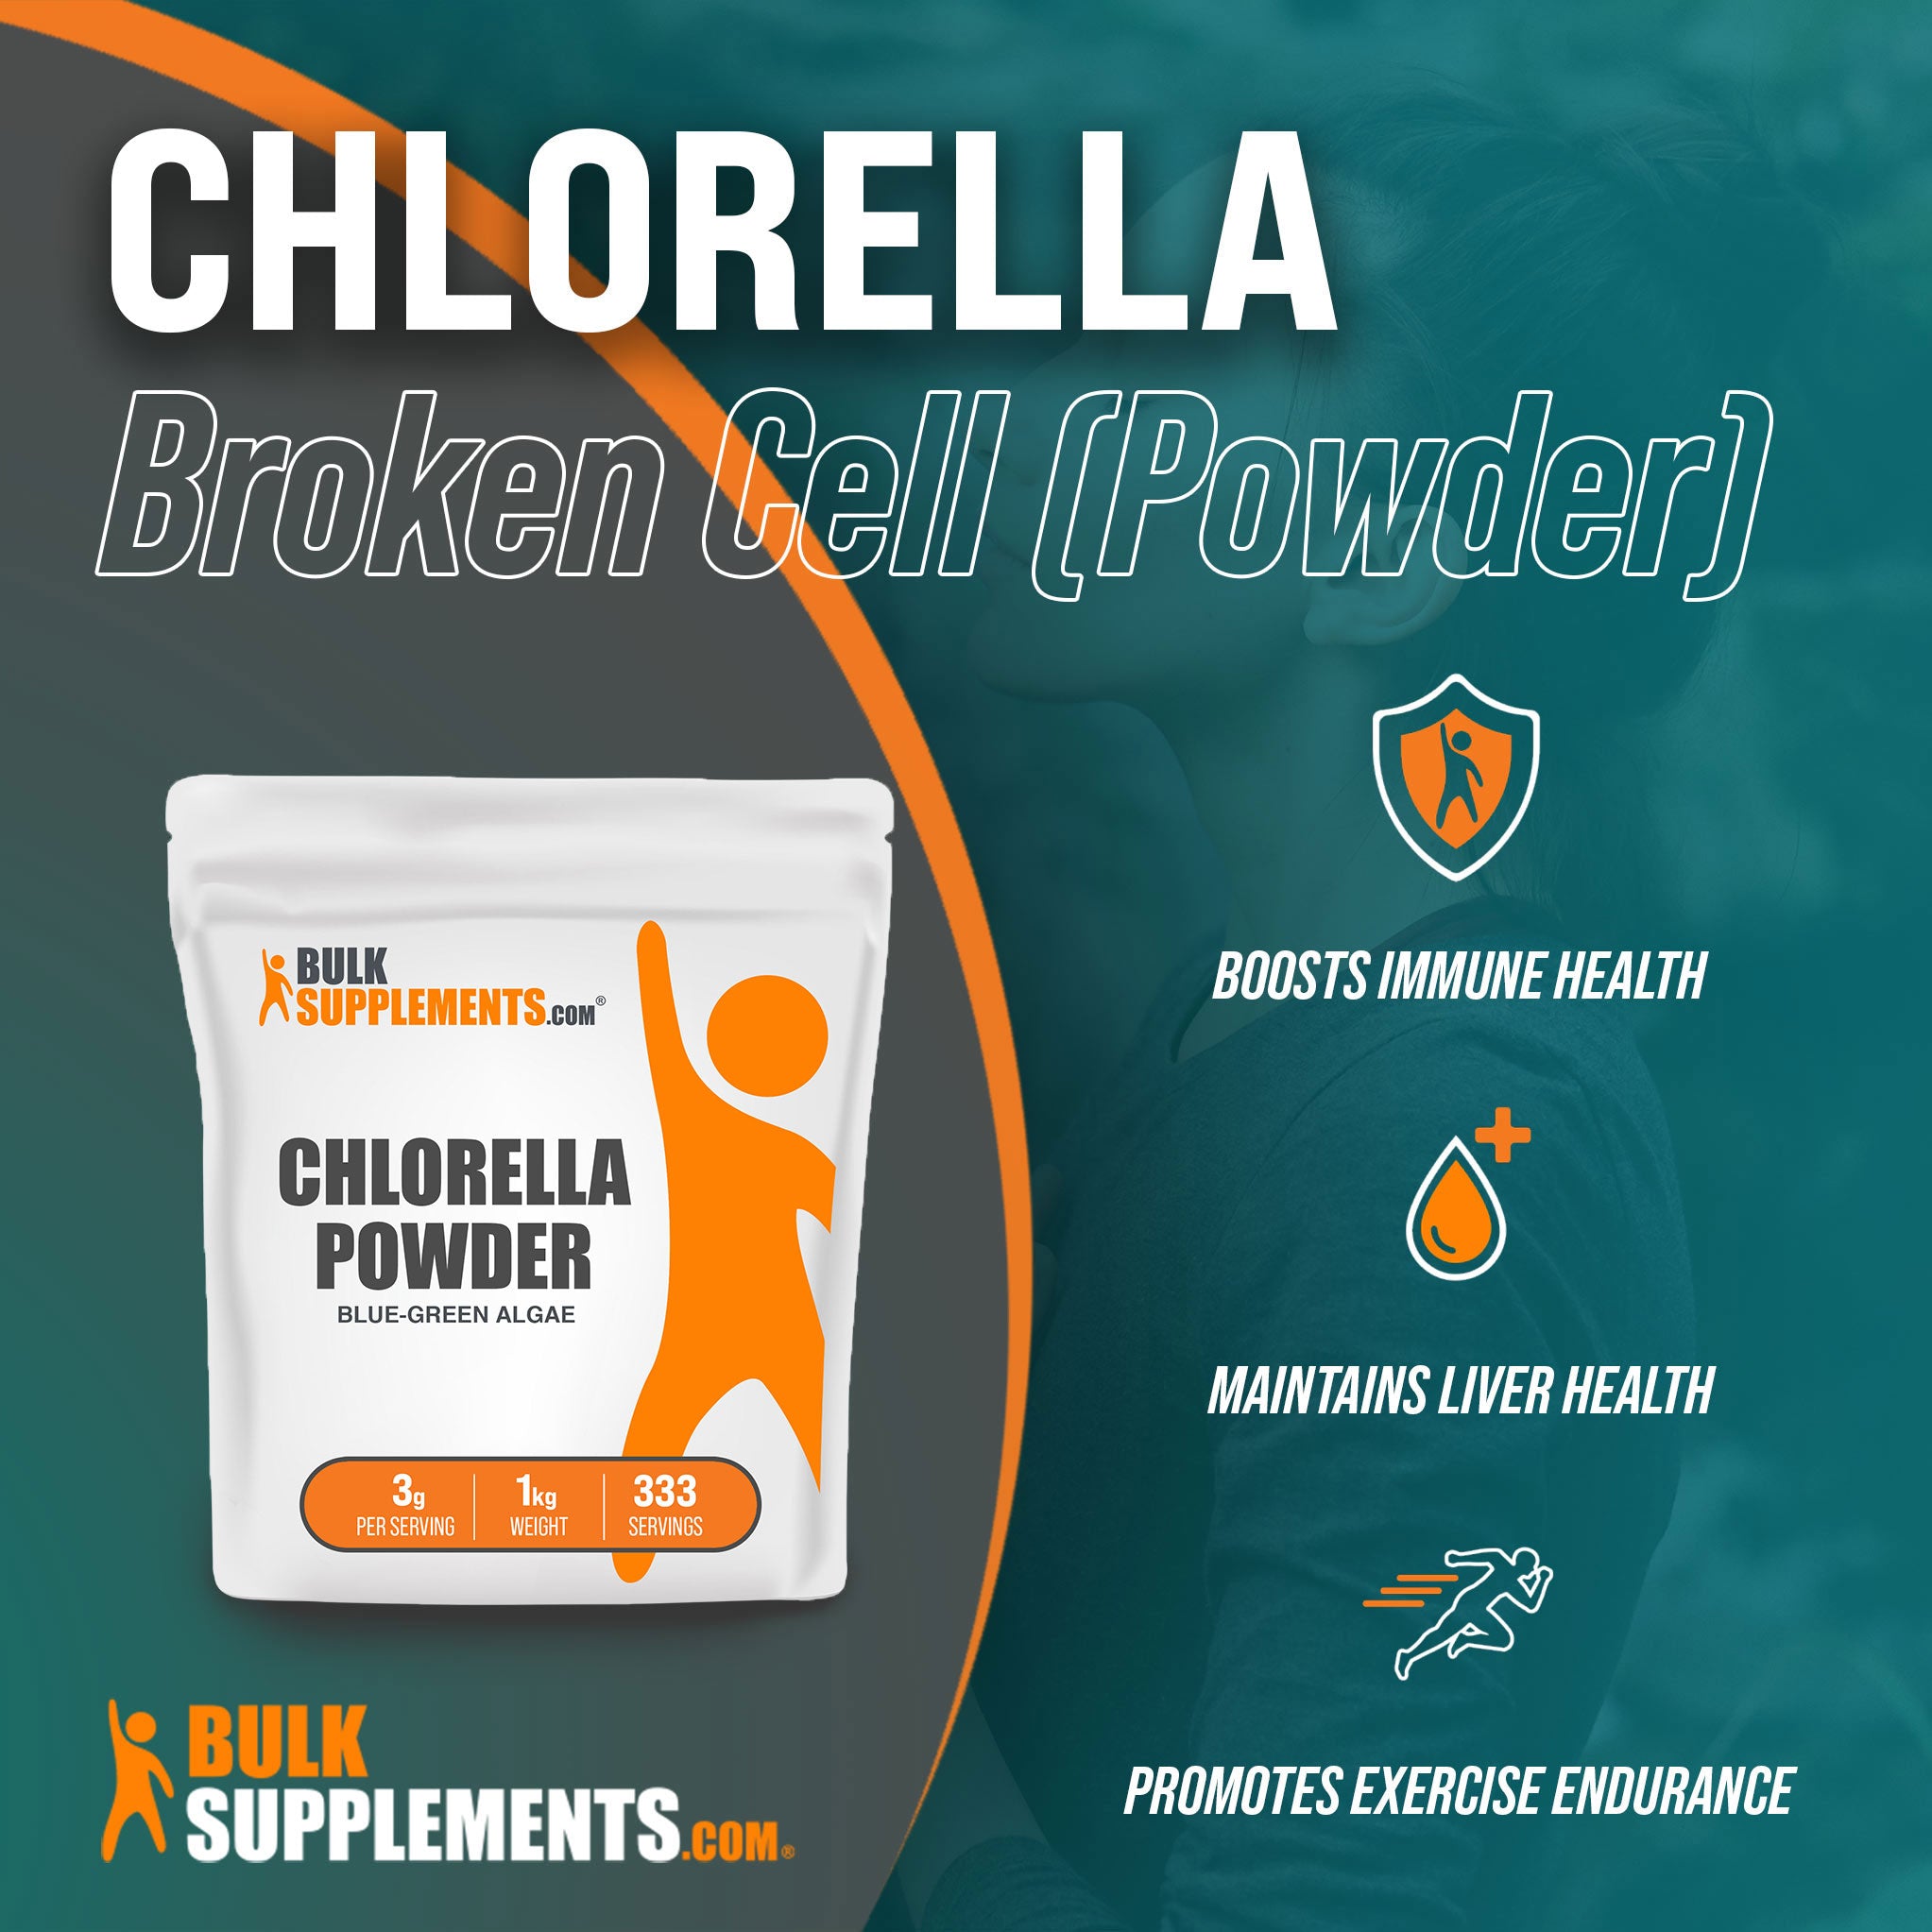 Benefits of 1kg Chlorella greens superfood powder; boosts immune health, maintains liver health, promotes exercise endurance